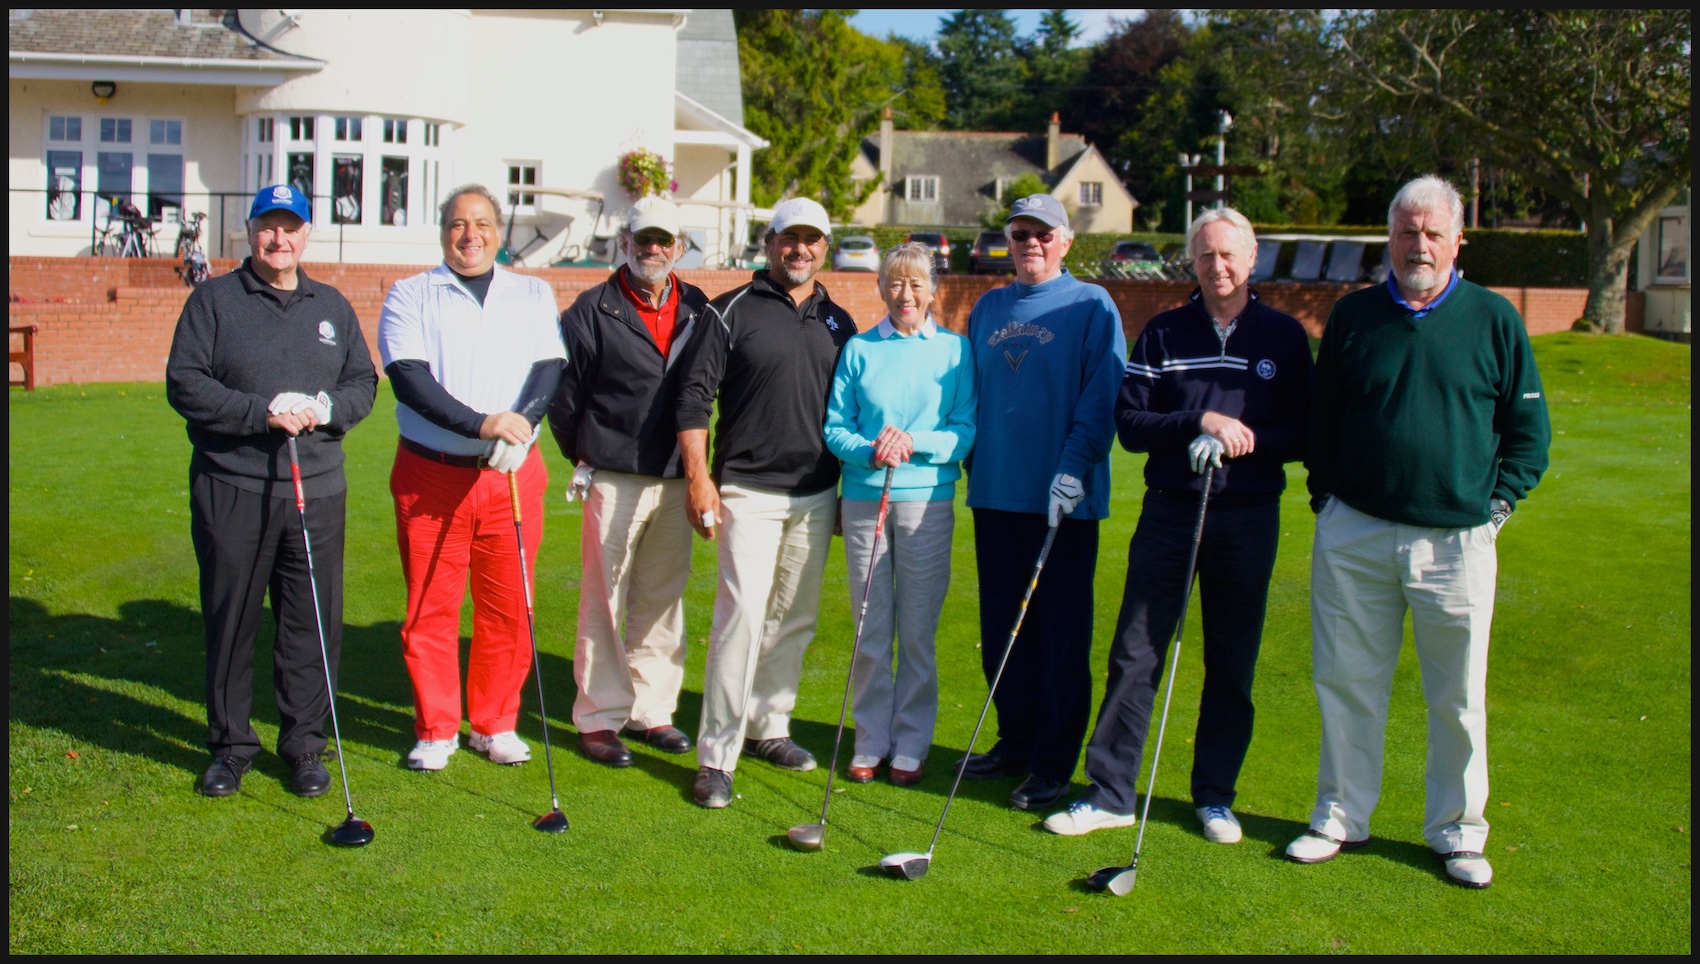 Ryder Cup Rosemount, Blairgowrie -- Graeme, Ronnie, Sandy, Mike, Margaret, Alastair, Norrie and Lister